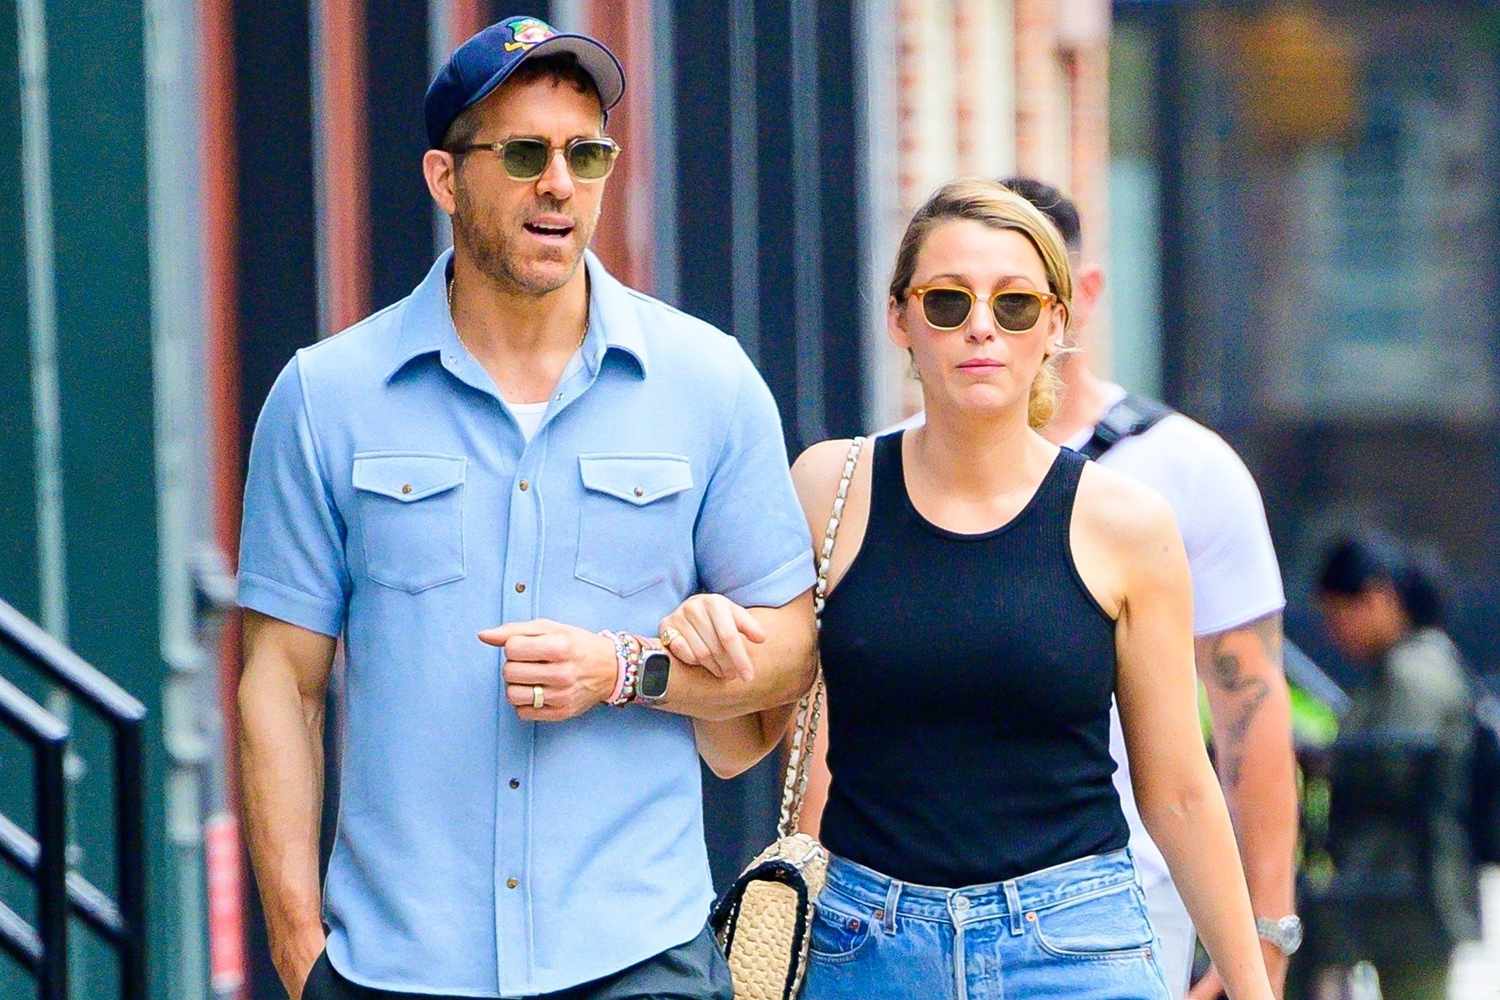 Blake Lively and Ryan Reynolds Take a Loved-Up Stroll in New York City: Photo